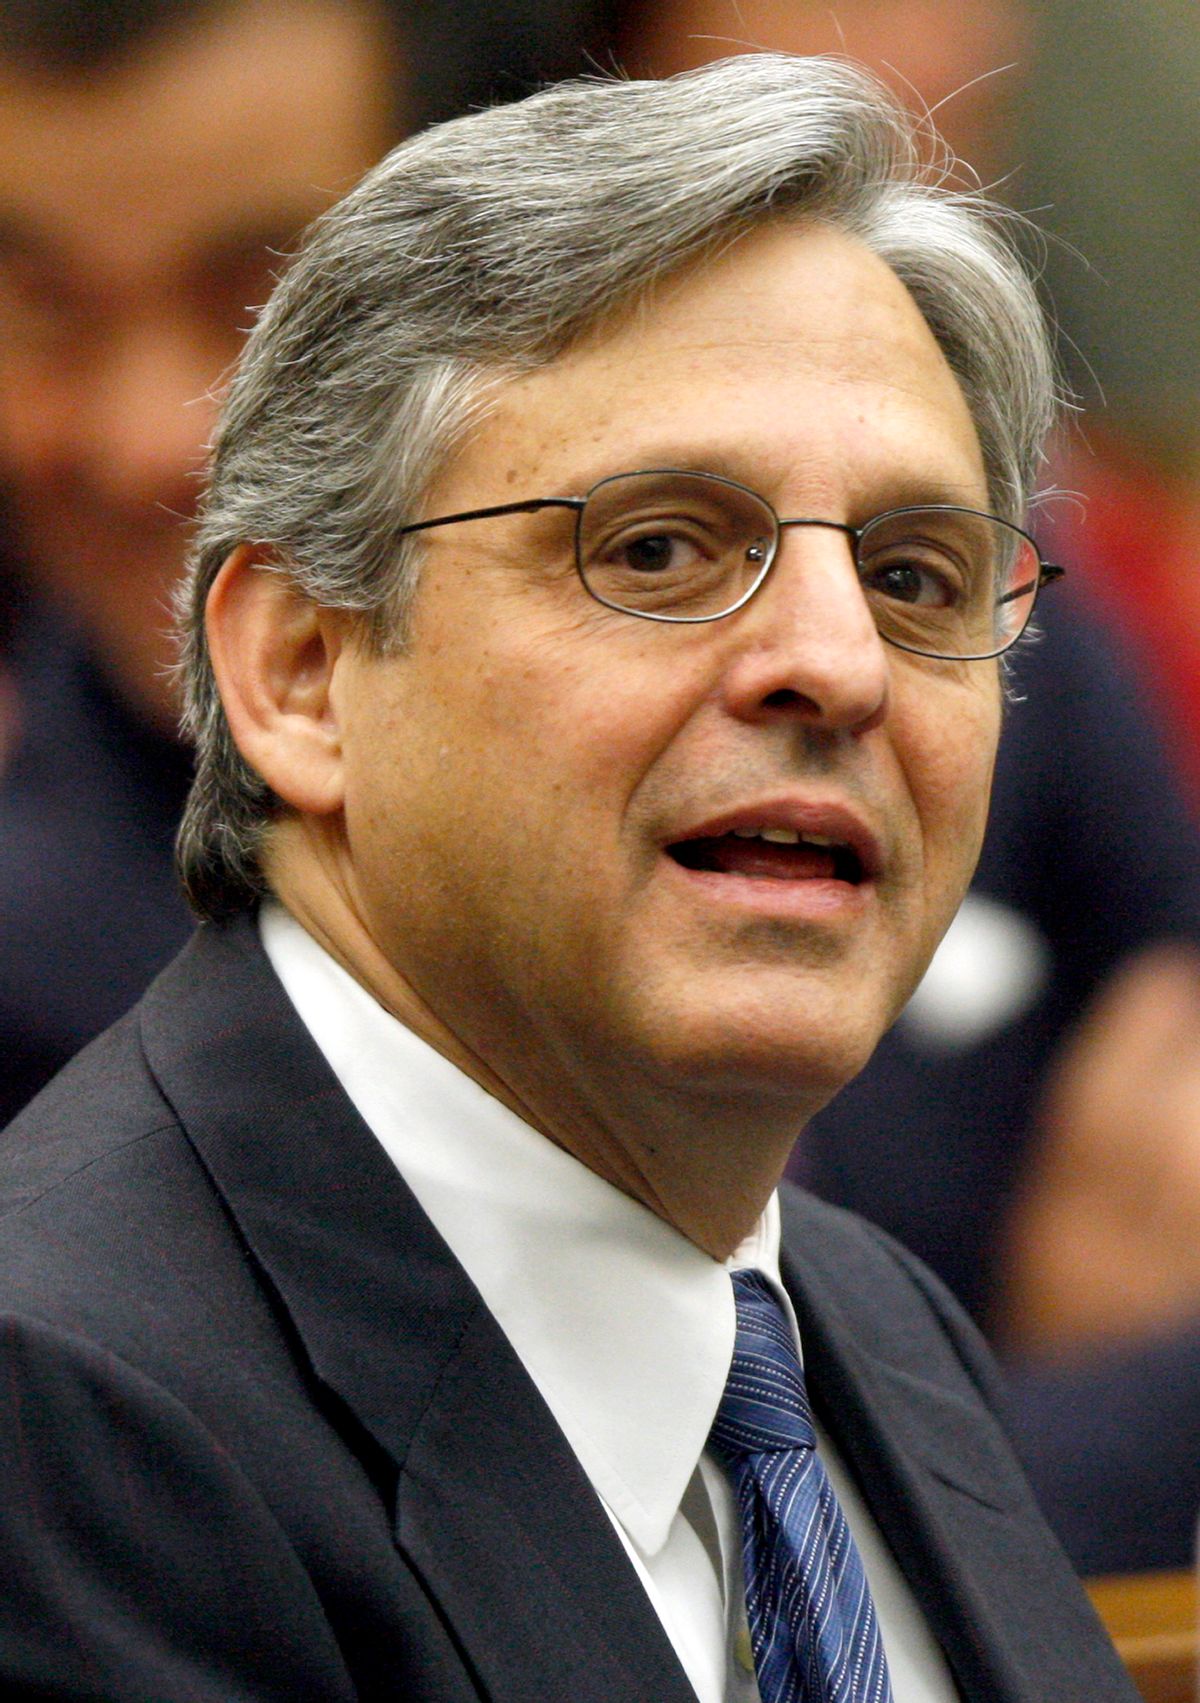 FILE - In this May 1, 2008 file photo, Judge Merrick B. Garland, U.S. Court of Appeals for the District of Columbia Circuit, is pictured before the start of a ceremony at the federal courthouse in Washington.  Two experienced federal judges and the Obama administration's top Supreme Court lawyer are widely considered the leading candidates for the next high court opening in the event Justice John Paul Stevens retires.  (AP Photo/Charles Dharapak, File) (Associated Press)